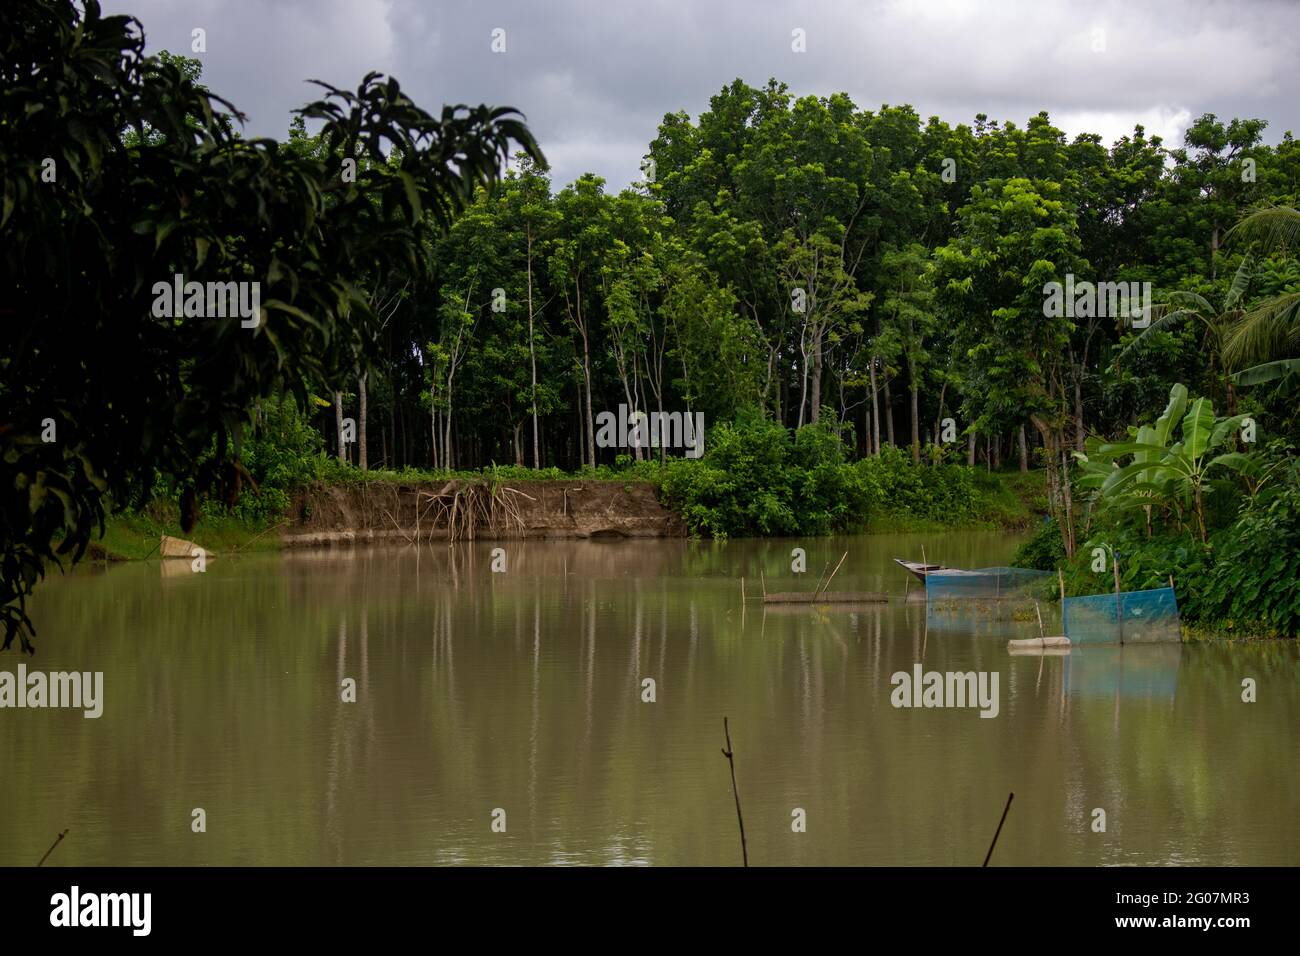 Bangladesh is a riverine country. A calm clear beautiful small river. A picture of the river nature of Bangladesh. Stock Photo